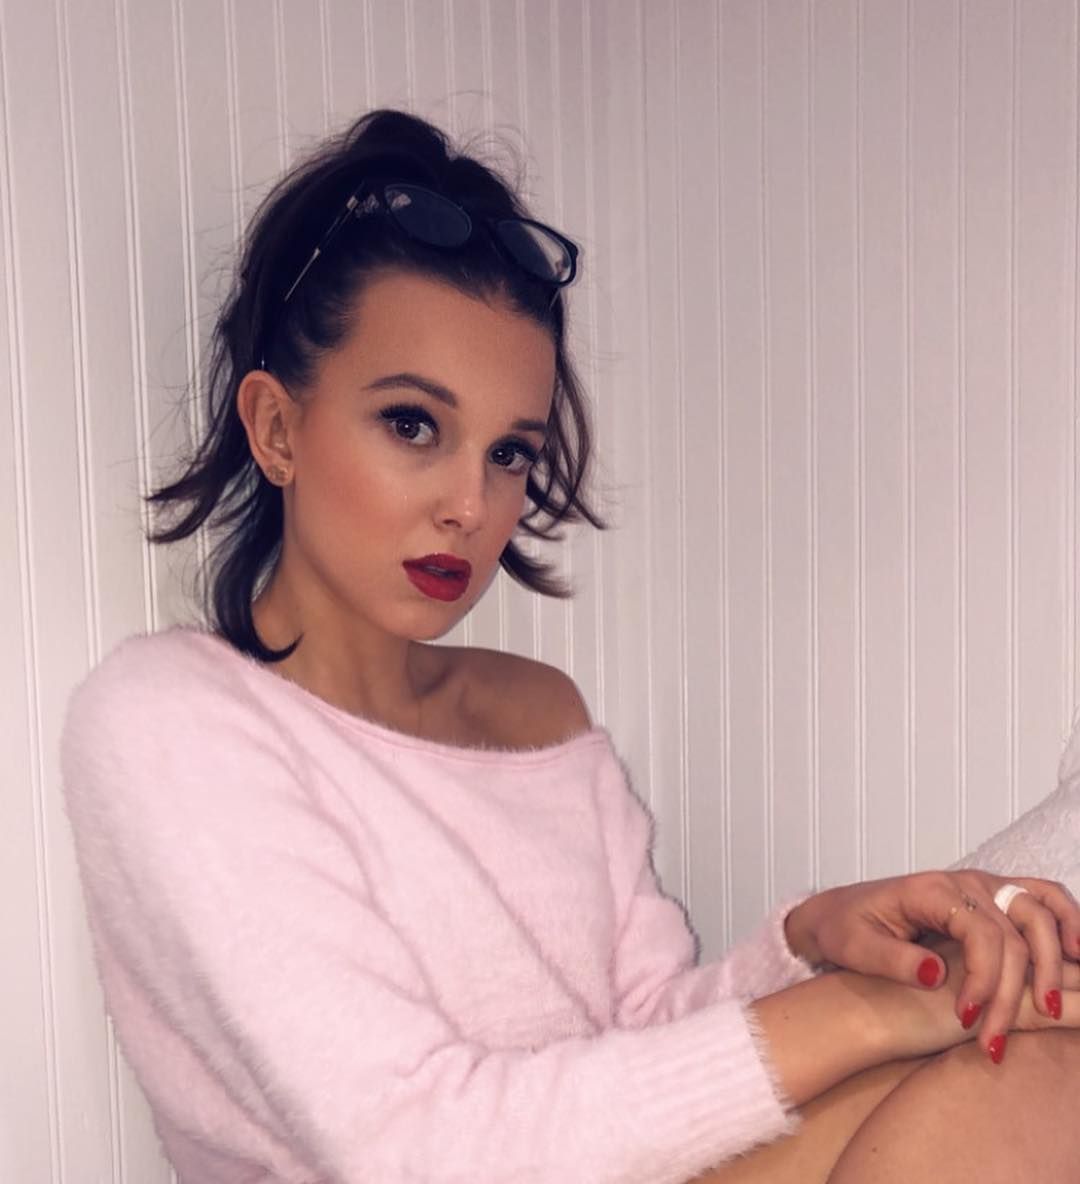 Millie Bobby Brown Accepts Empowerment Challenge In Sheer Crop Top